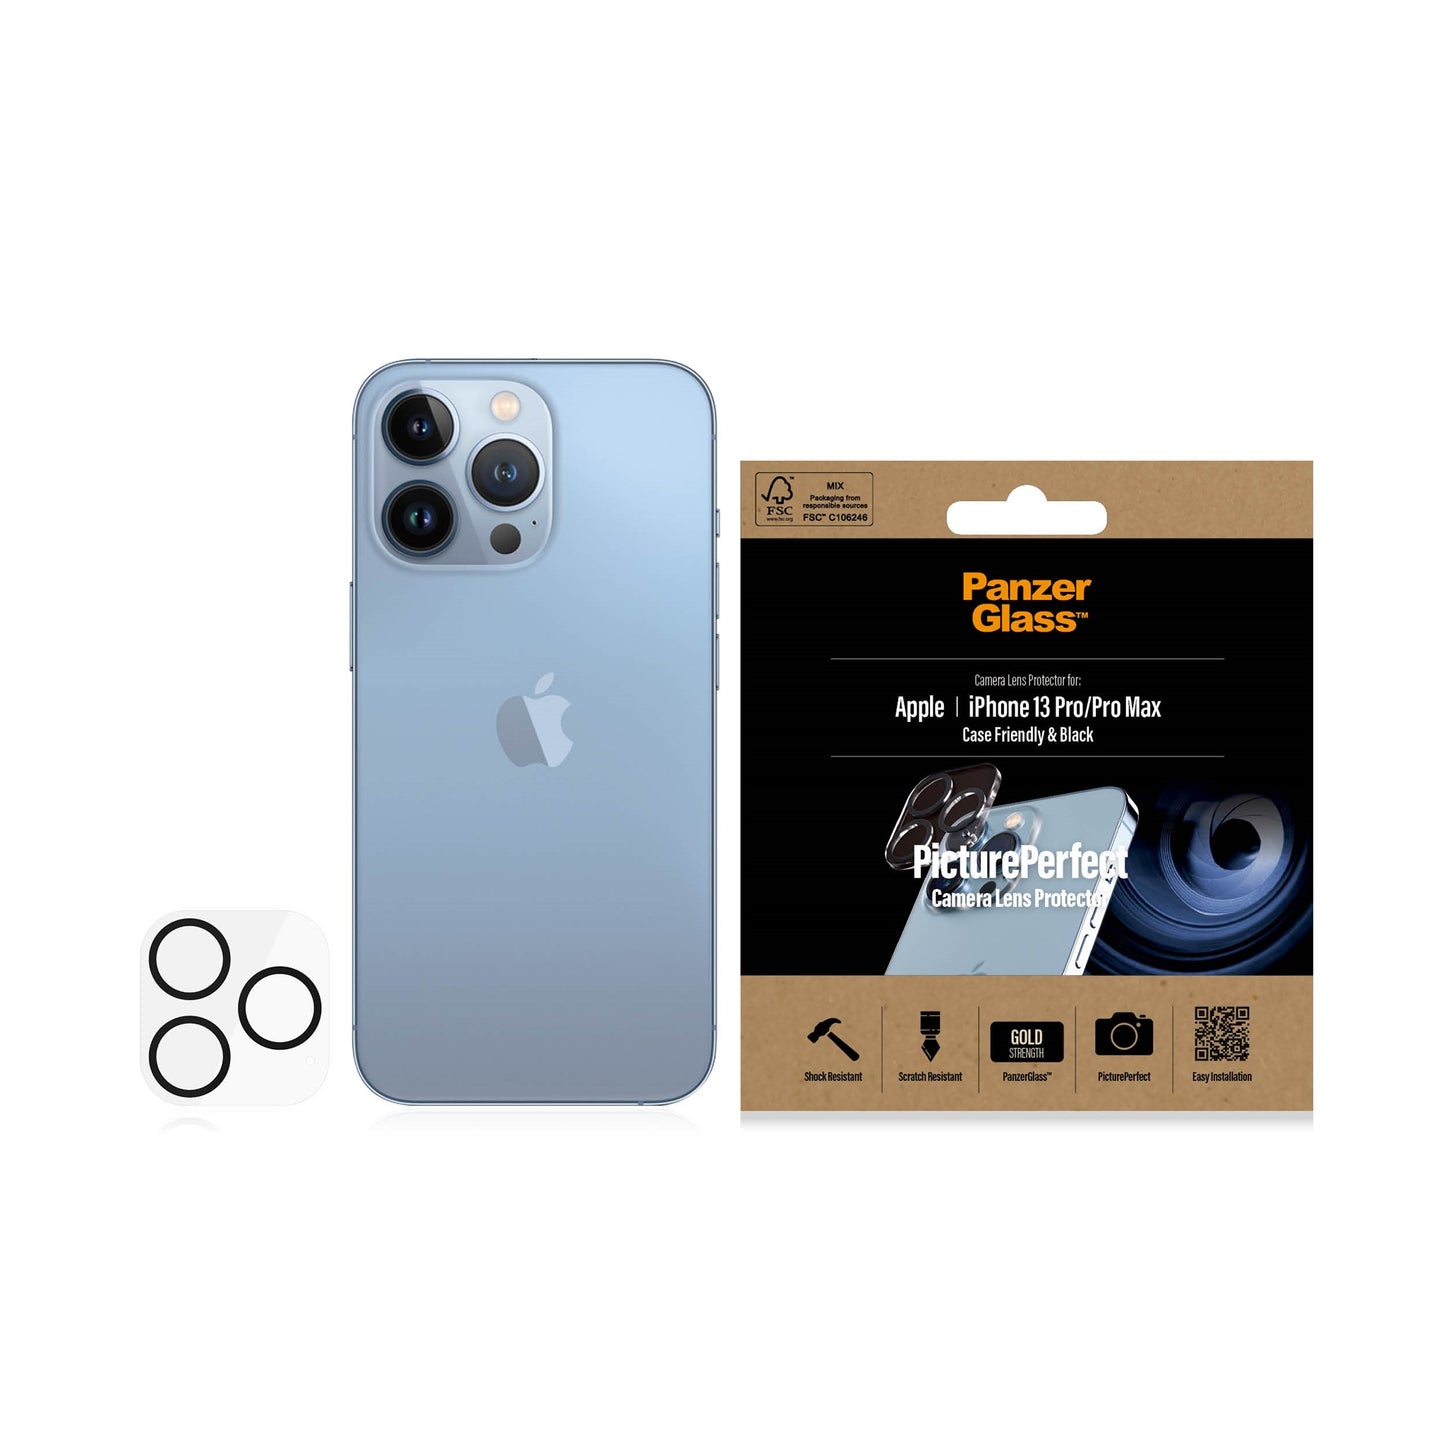 PanzerGlass™ PicturePerfect Camera Lens Protector Apple iPhone 13 Pro | Pro Max 3